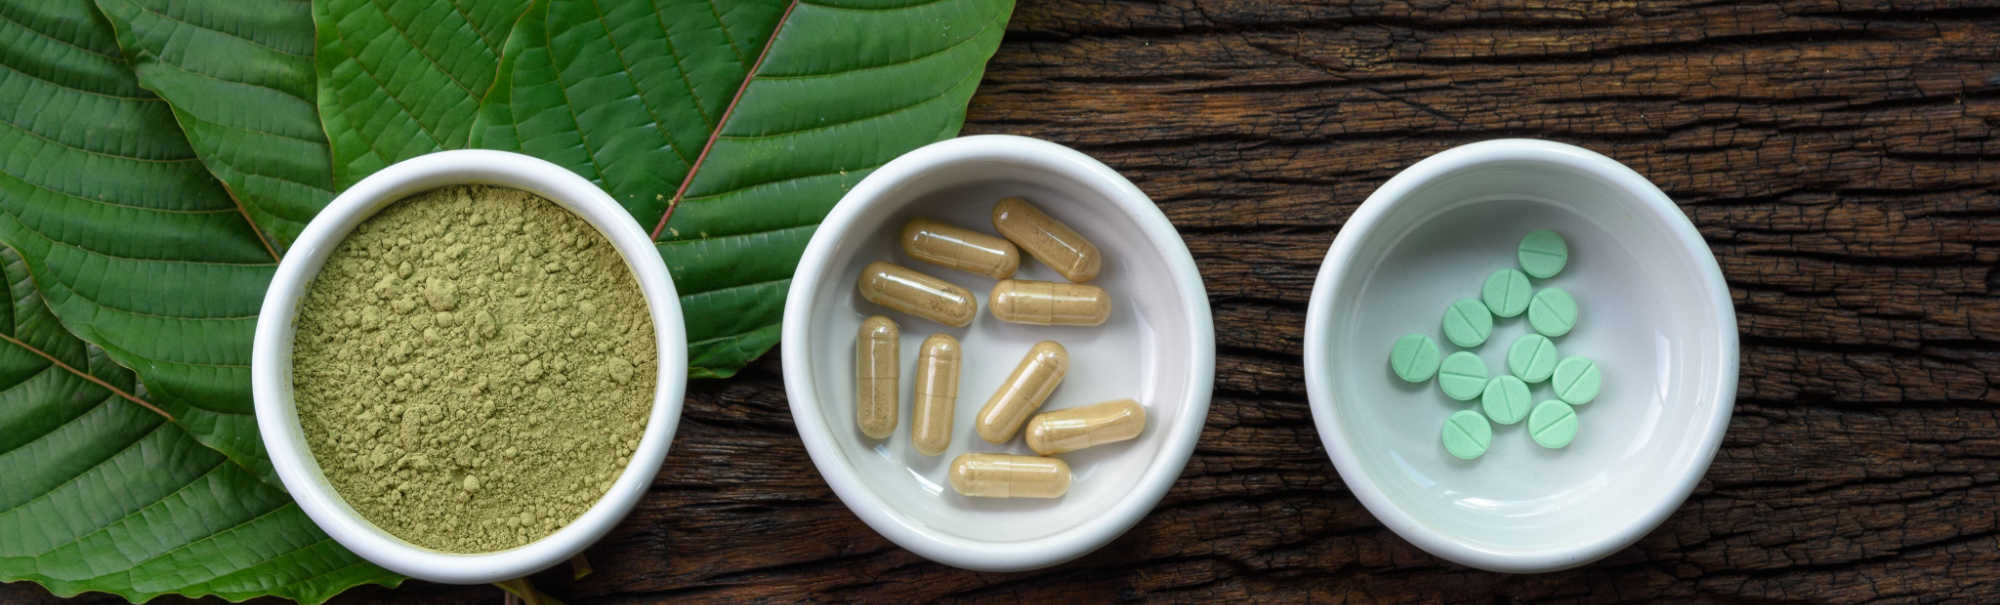 Is It Safe to Use Kratom While Breastfeeding?